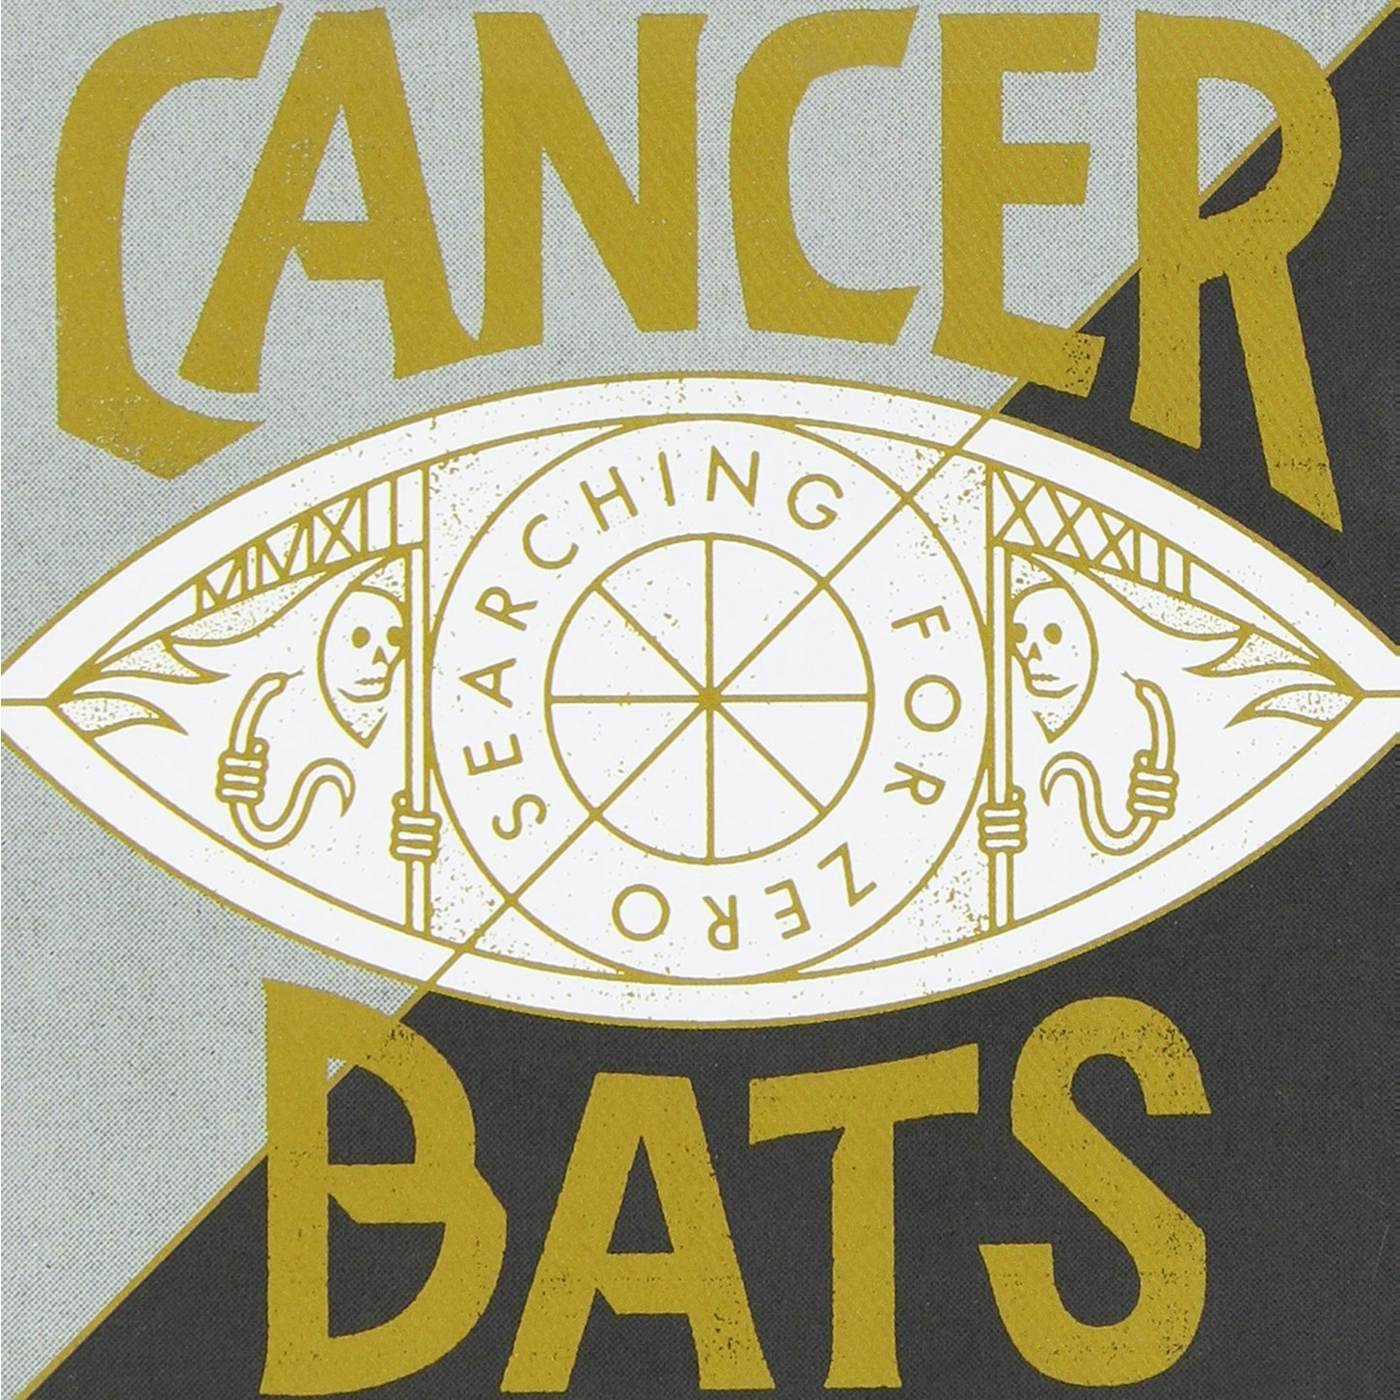 Cancer Bats SEARCHING FOR ZERO CD